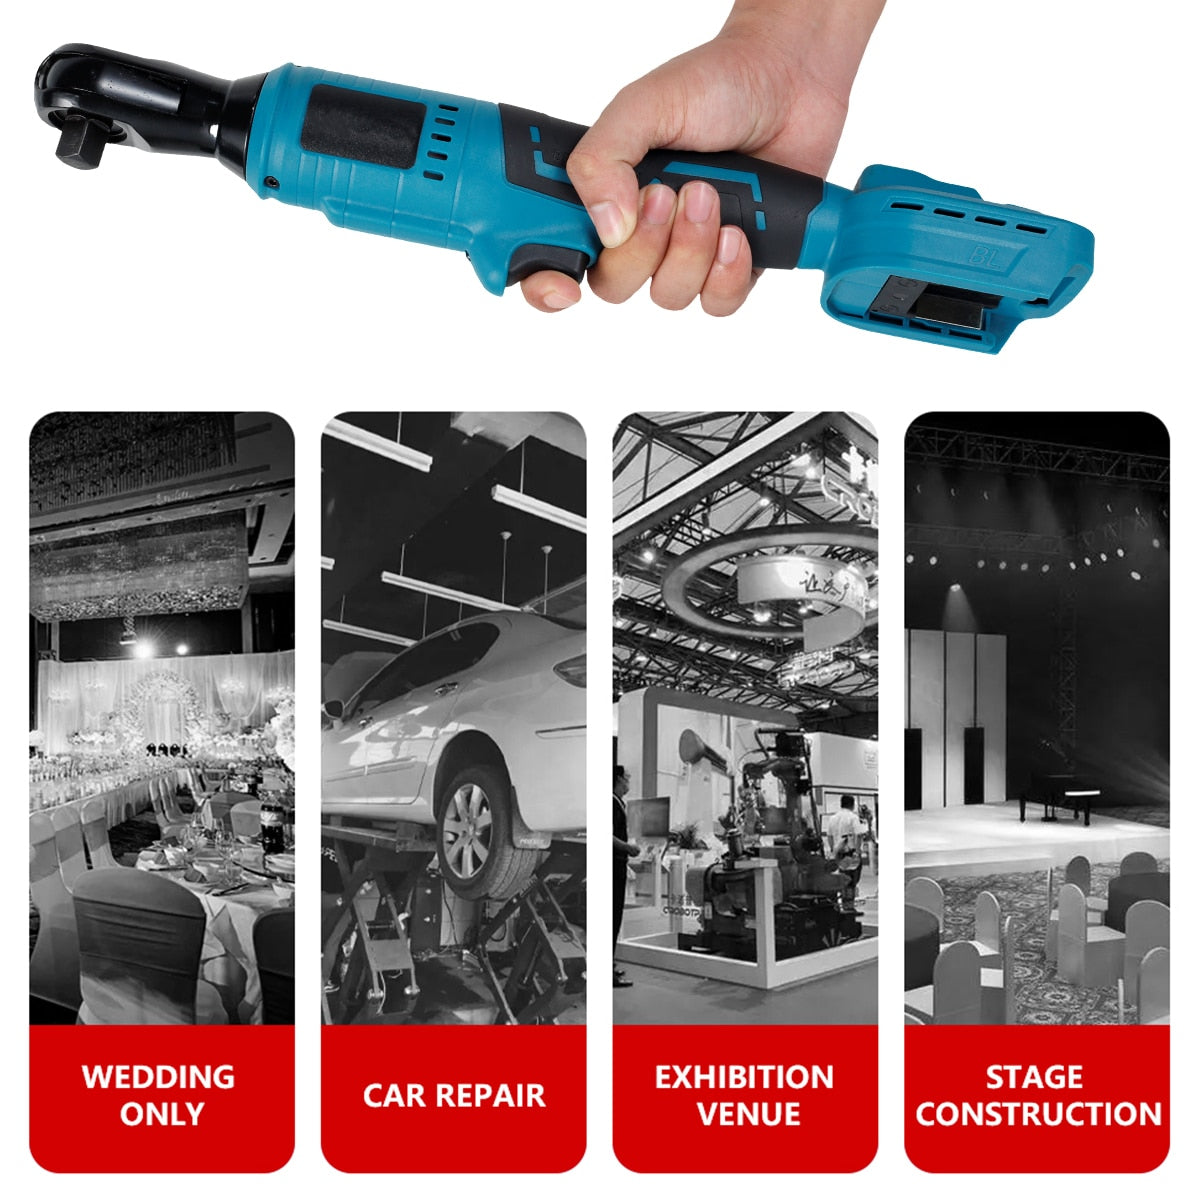 Electric Ratchet Wrench 18V 1/2inch Cordless Brushless Right Angle Wrench, LED Light Screw Removal